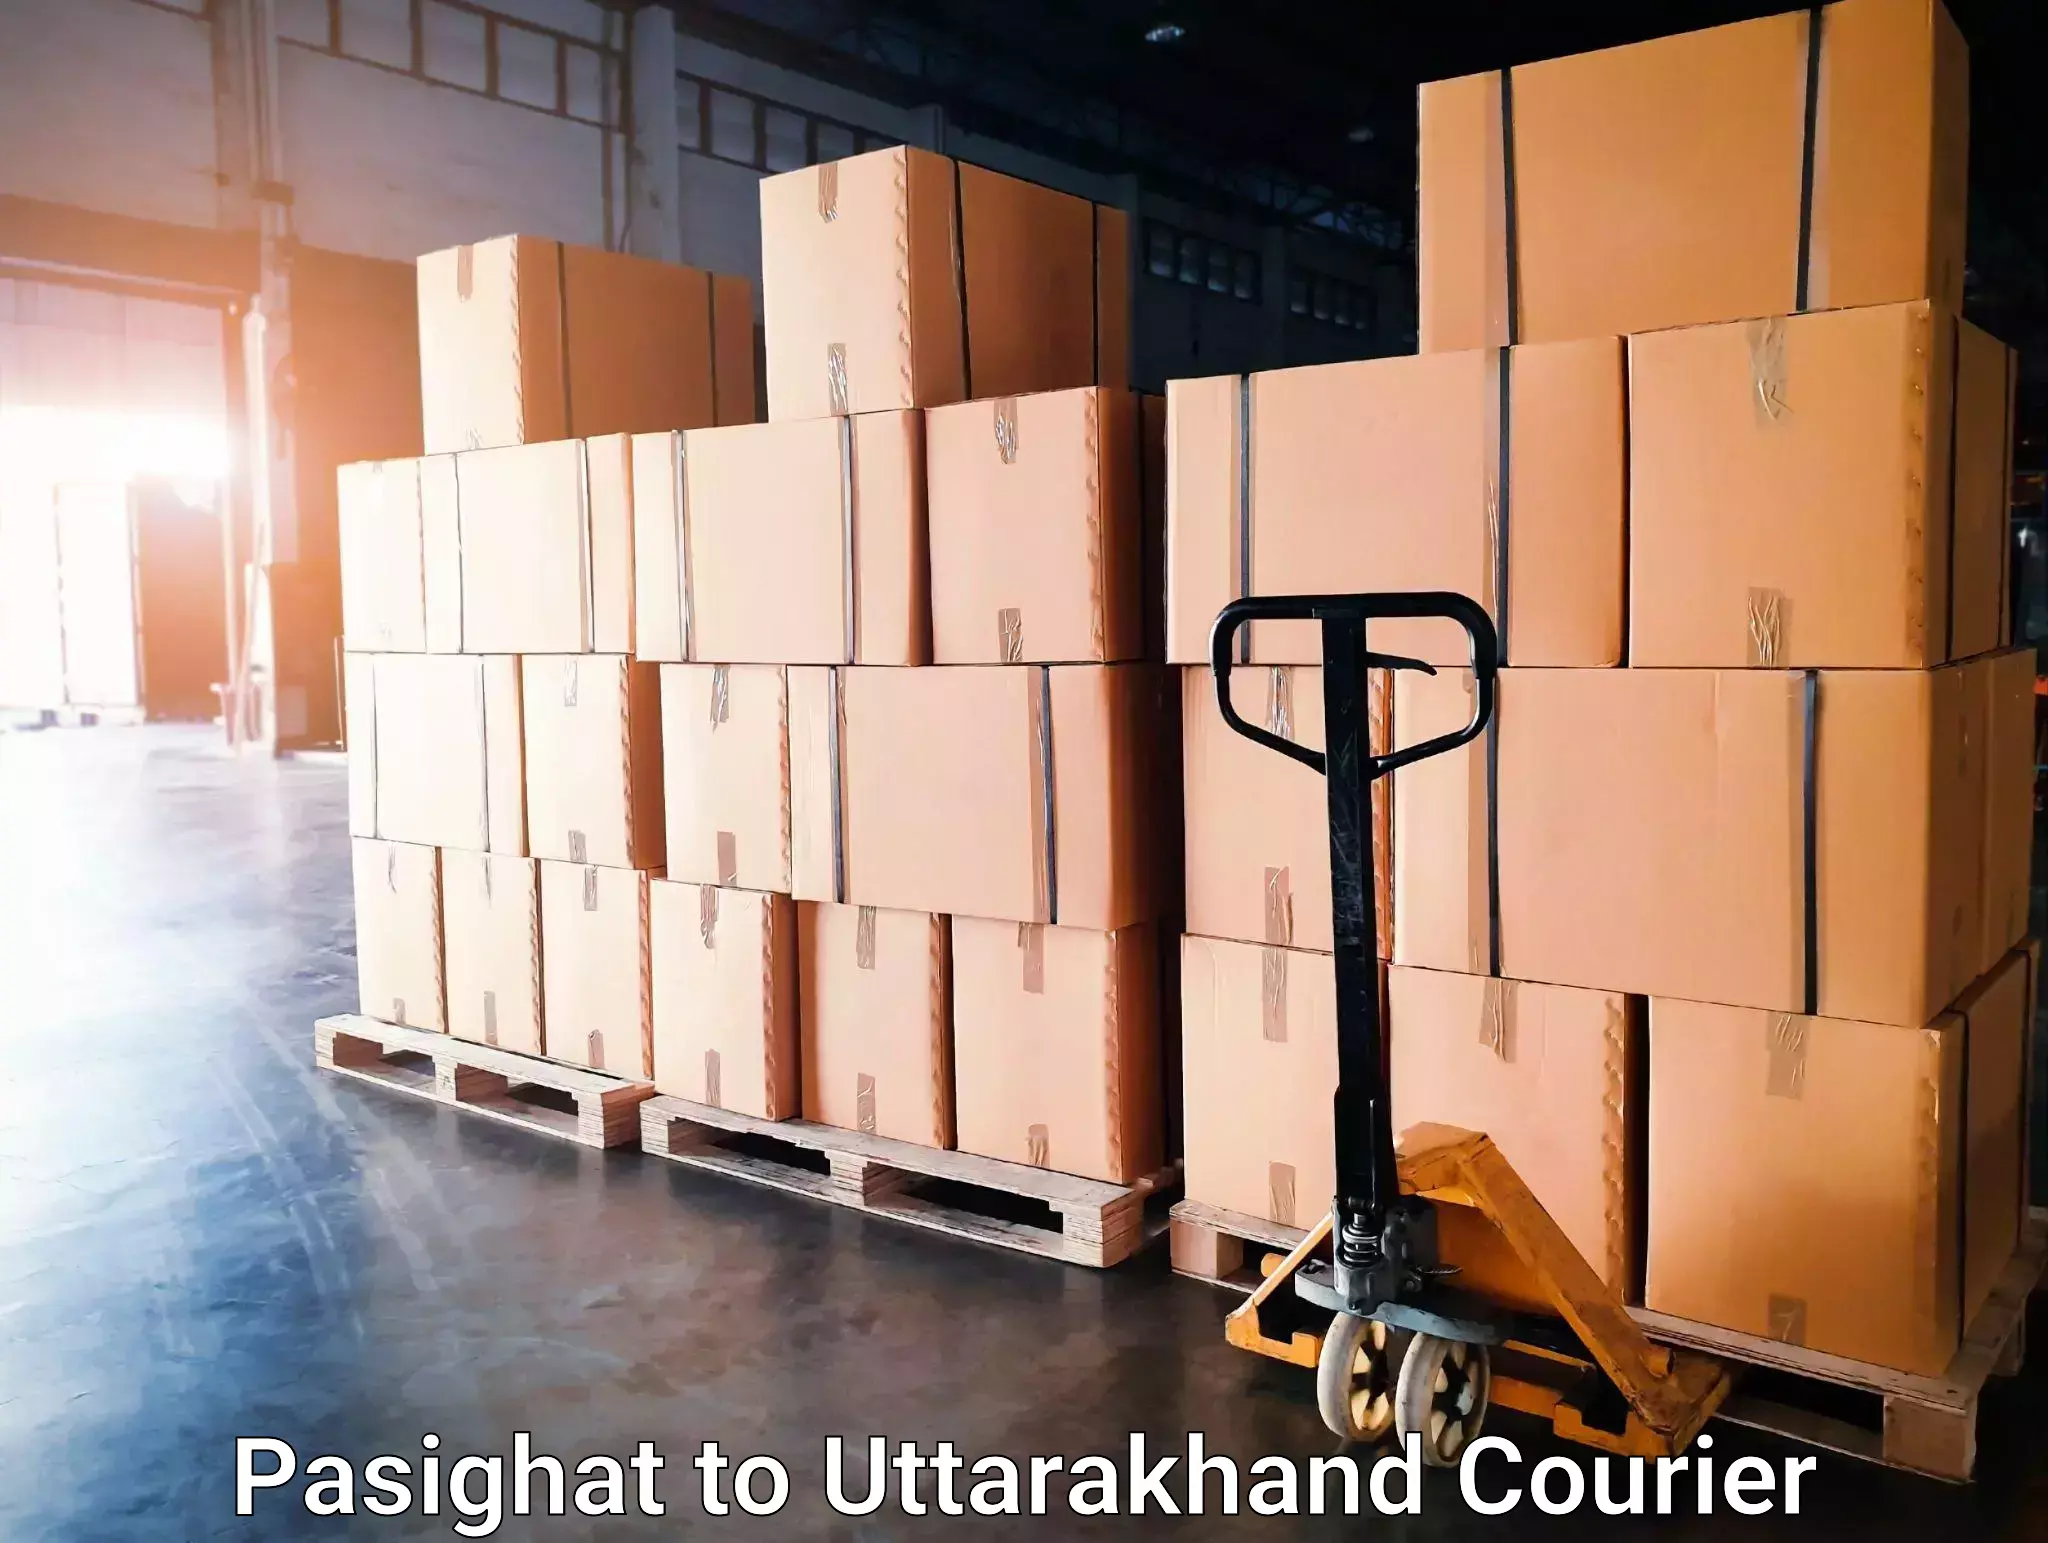 State-of-the-art courier technology Pasighat to Dehradun